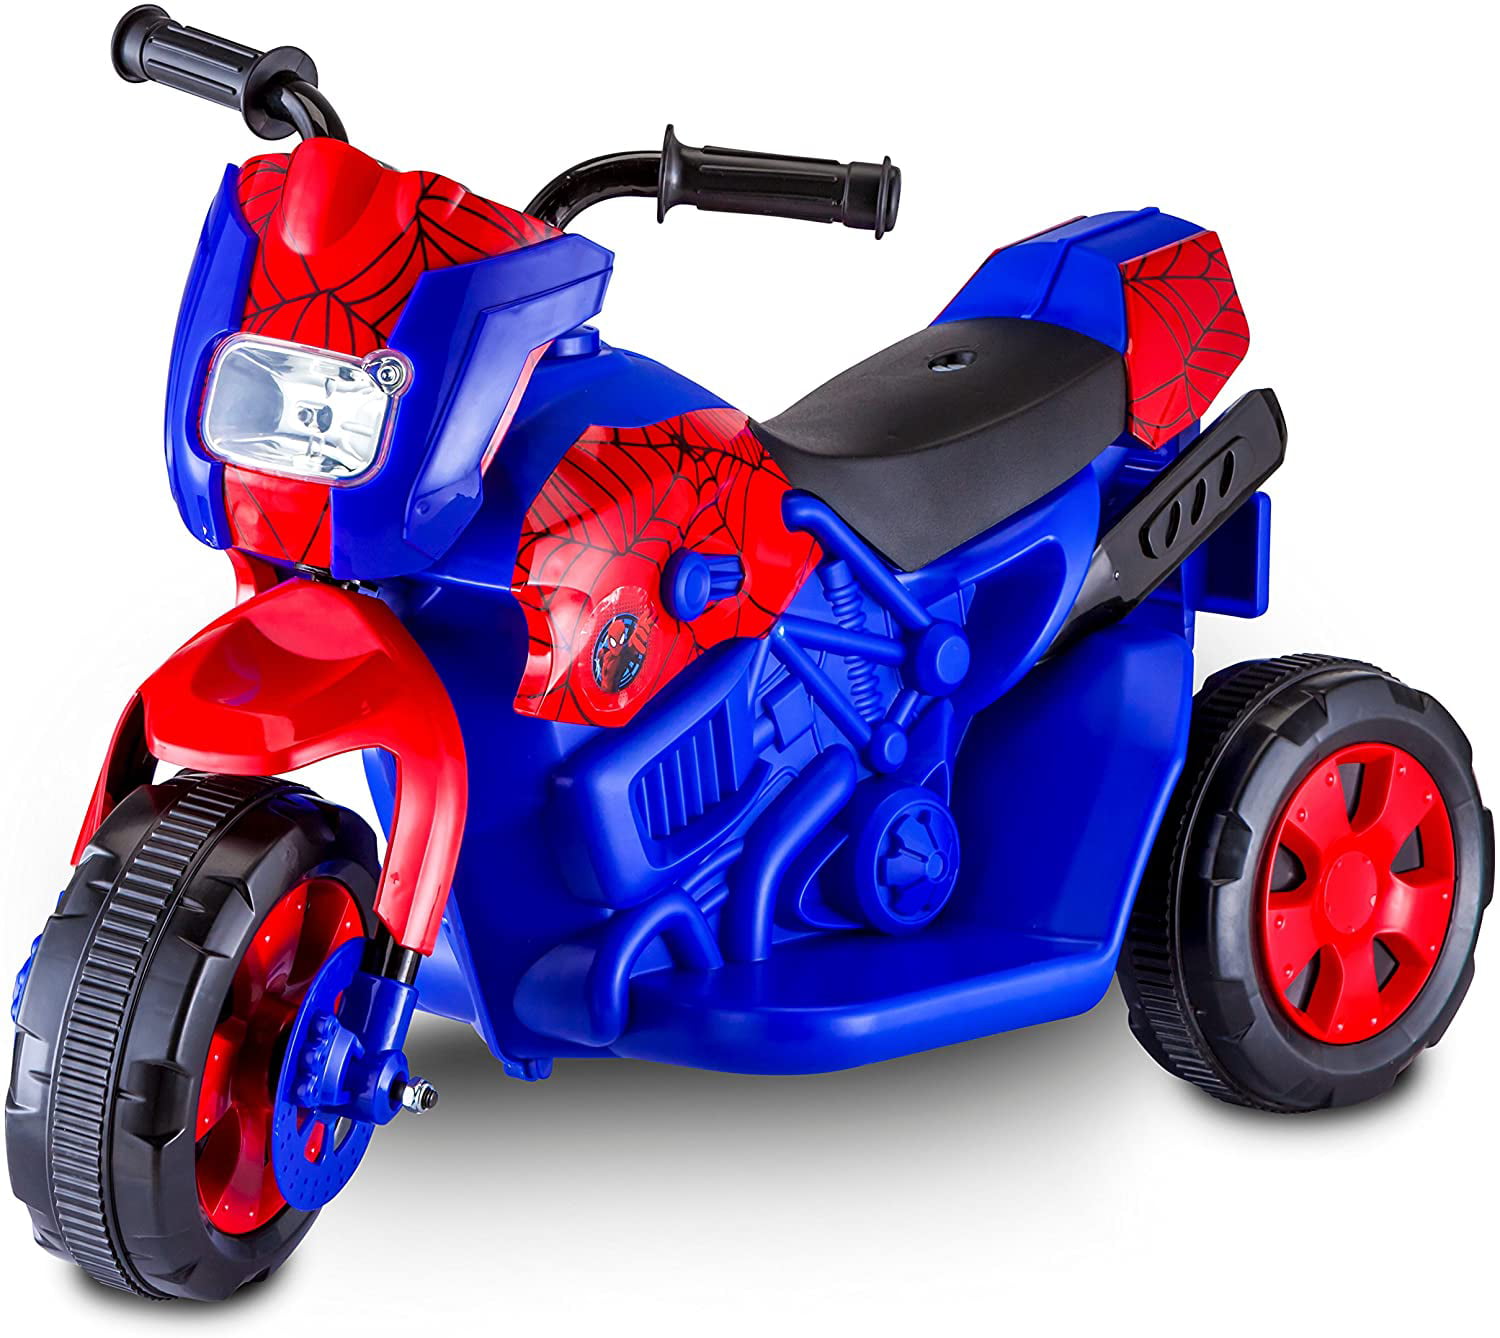 Motorbike Max from WOW Toys Motorbike Toy for 18 months plus 